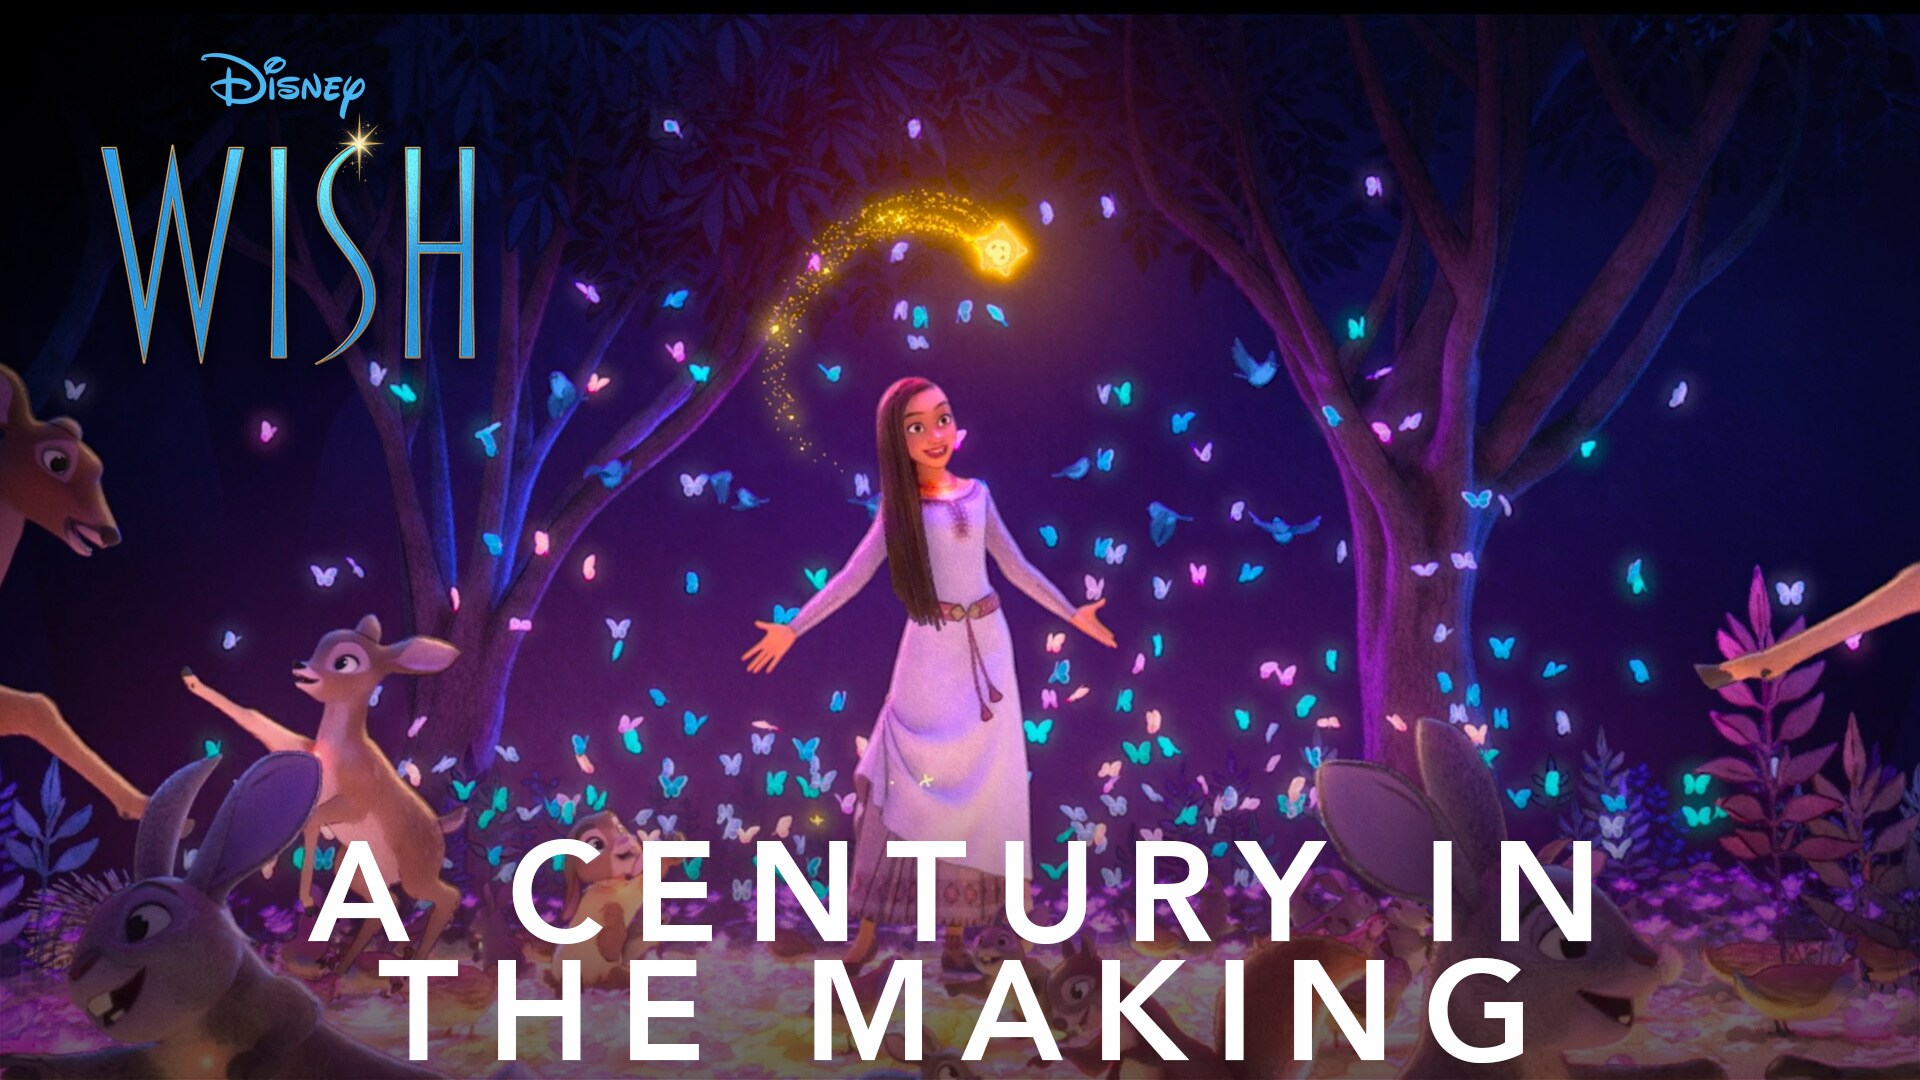 Disney's Wish | Featurette - "A Century In The Making"